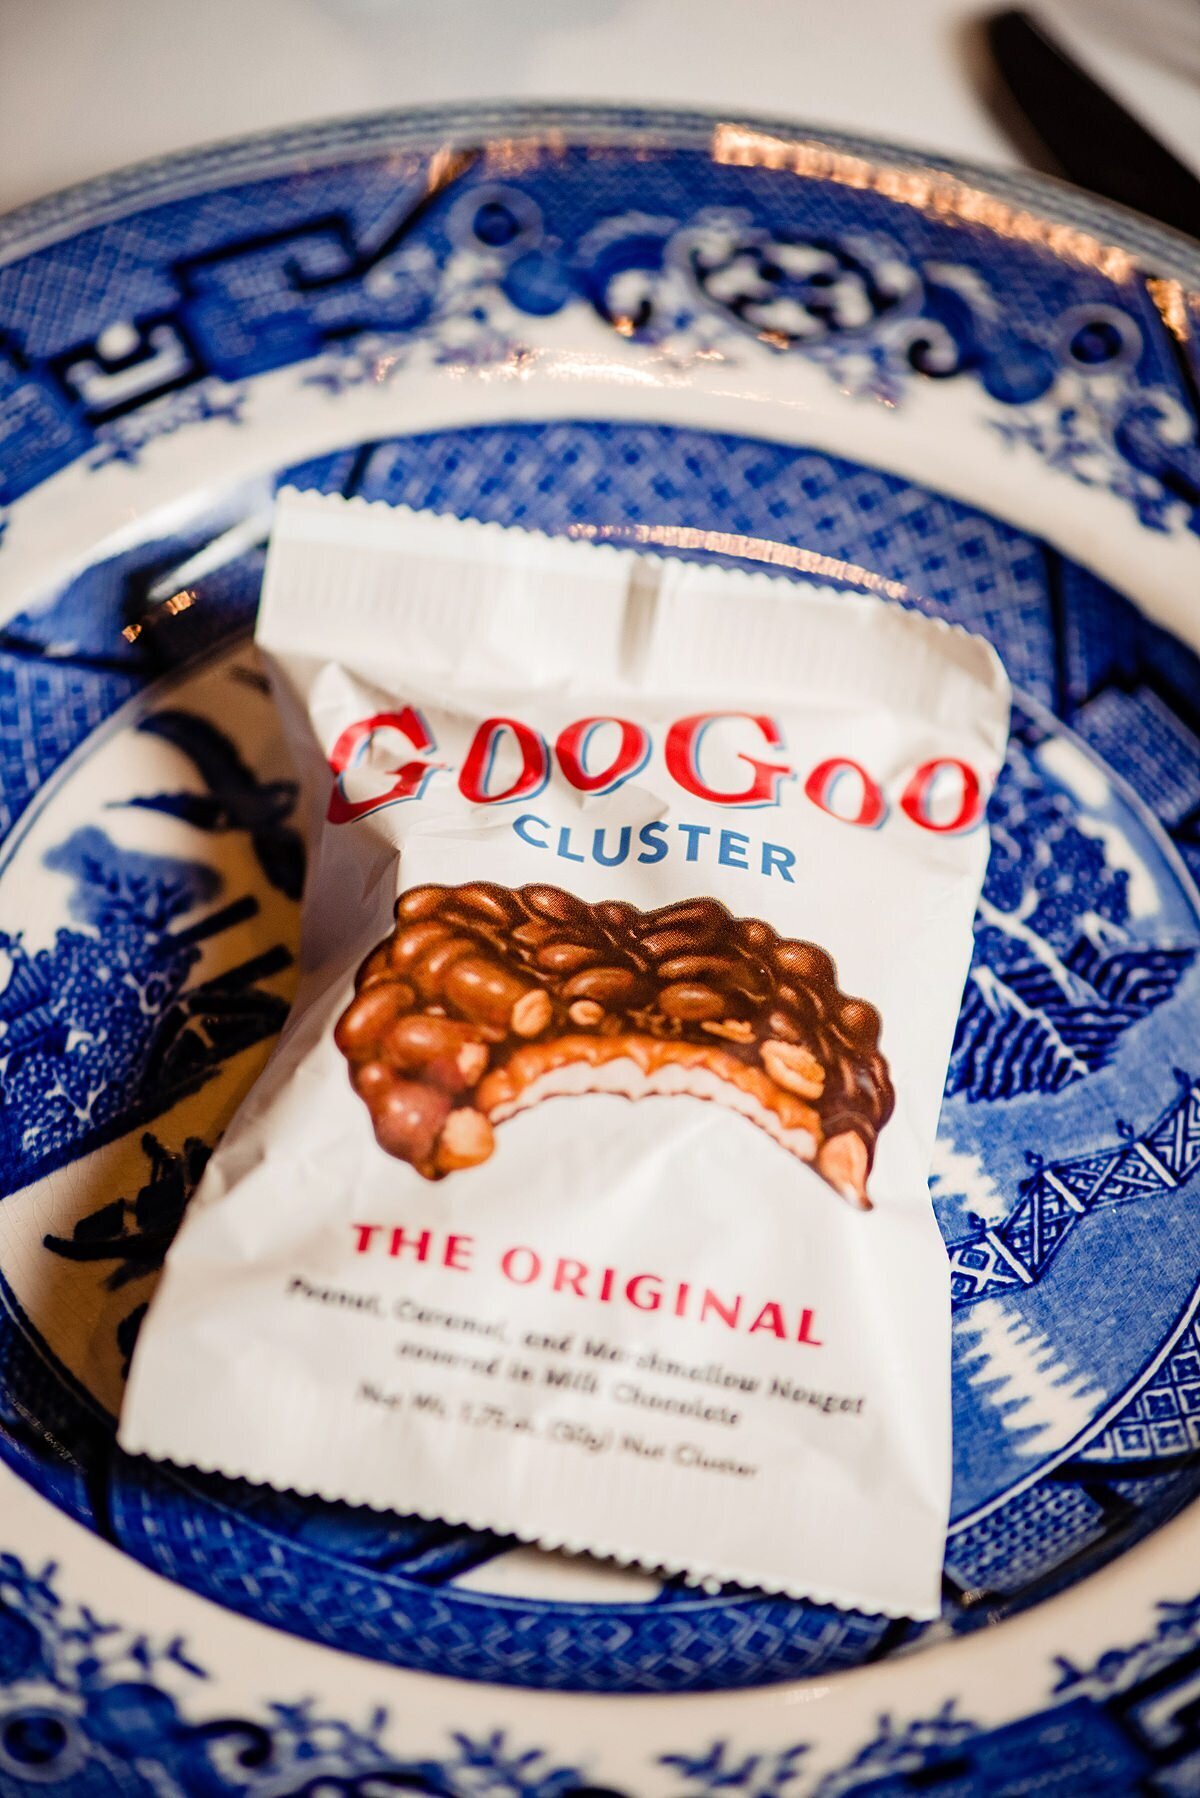 The original Goo Goo cluster candy on a vintage blue and white china plate.